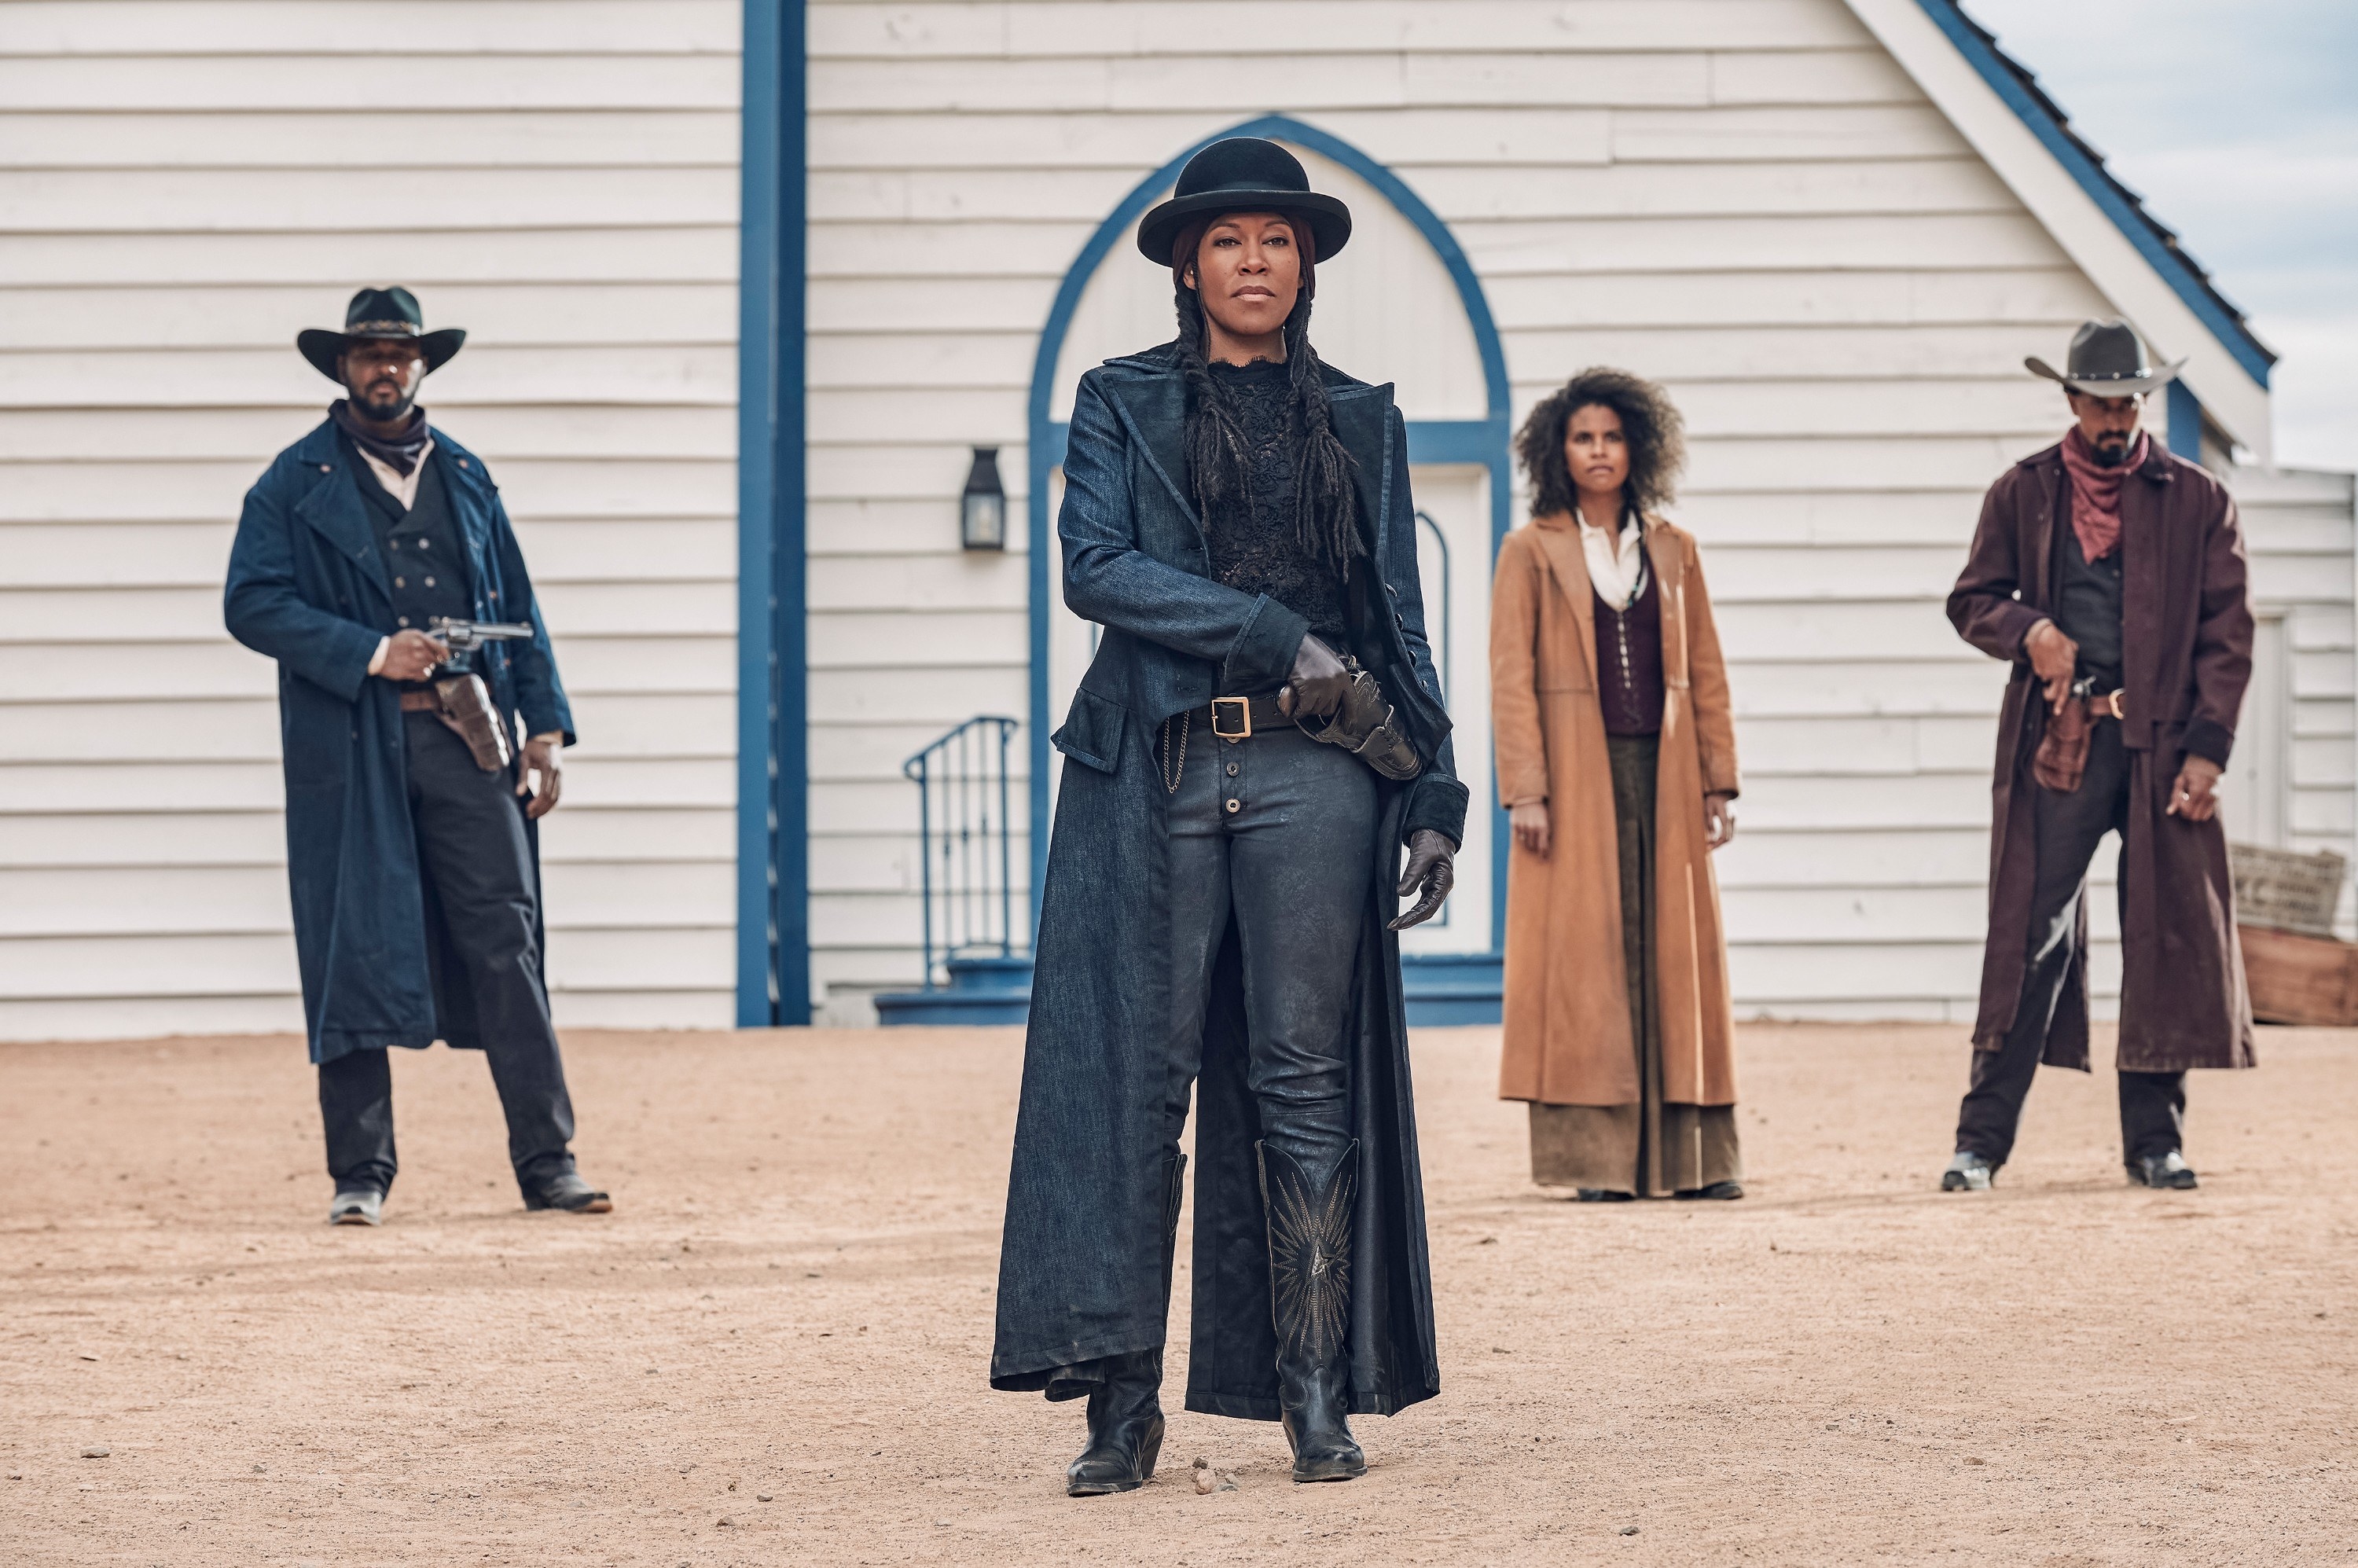 Regina King, Zazie Beets, and two other members of the cast standing in an open space guns at the ready